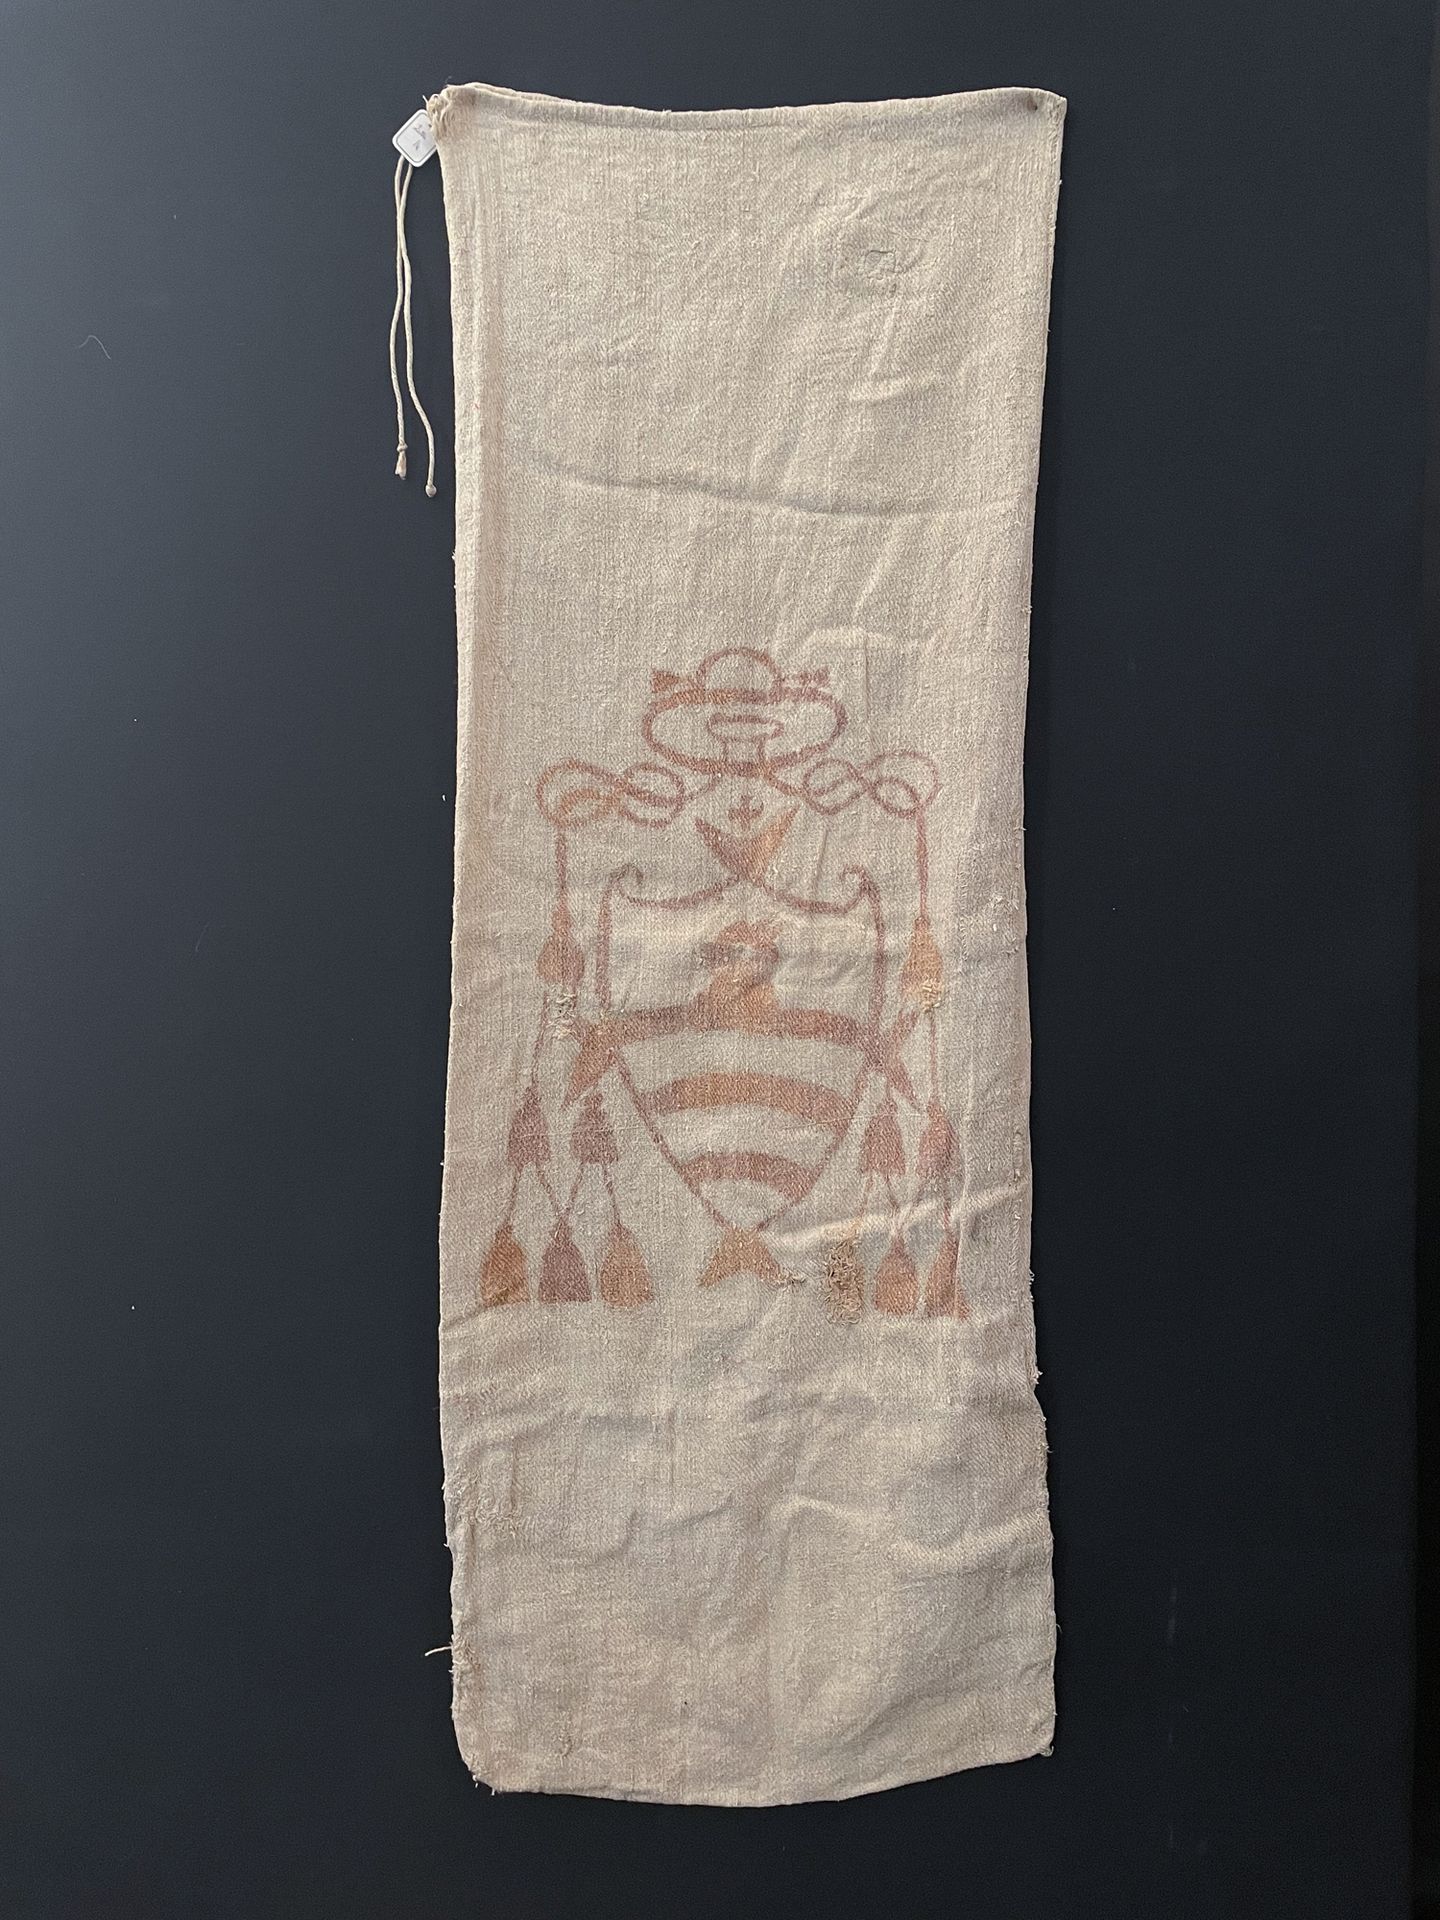 Null Burlap bag with episcopal coat of arms, Italy, probably 18th century, sturd&hellip;